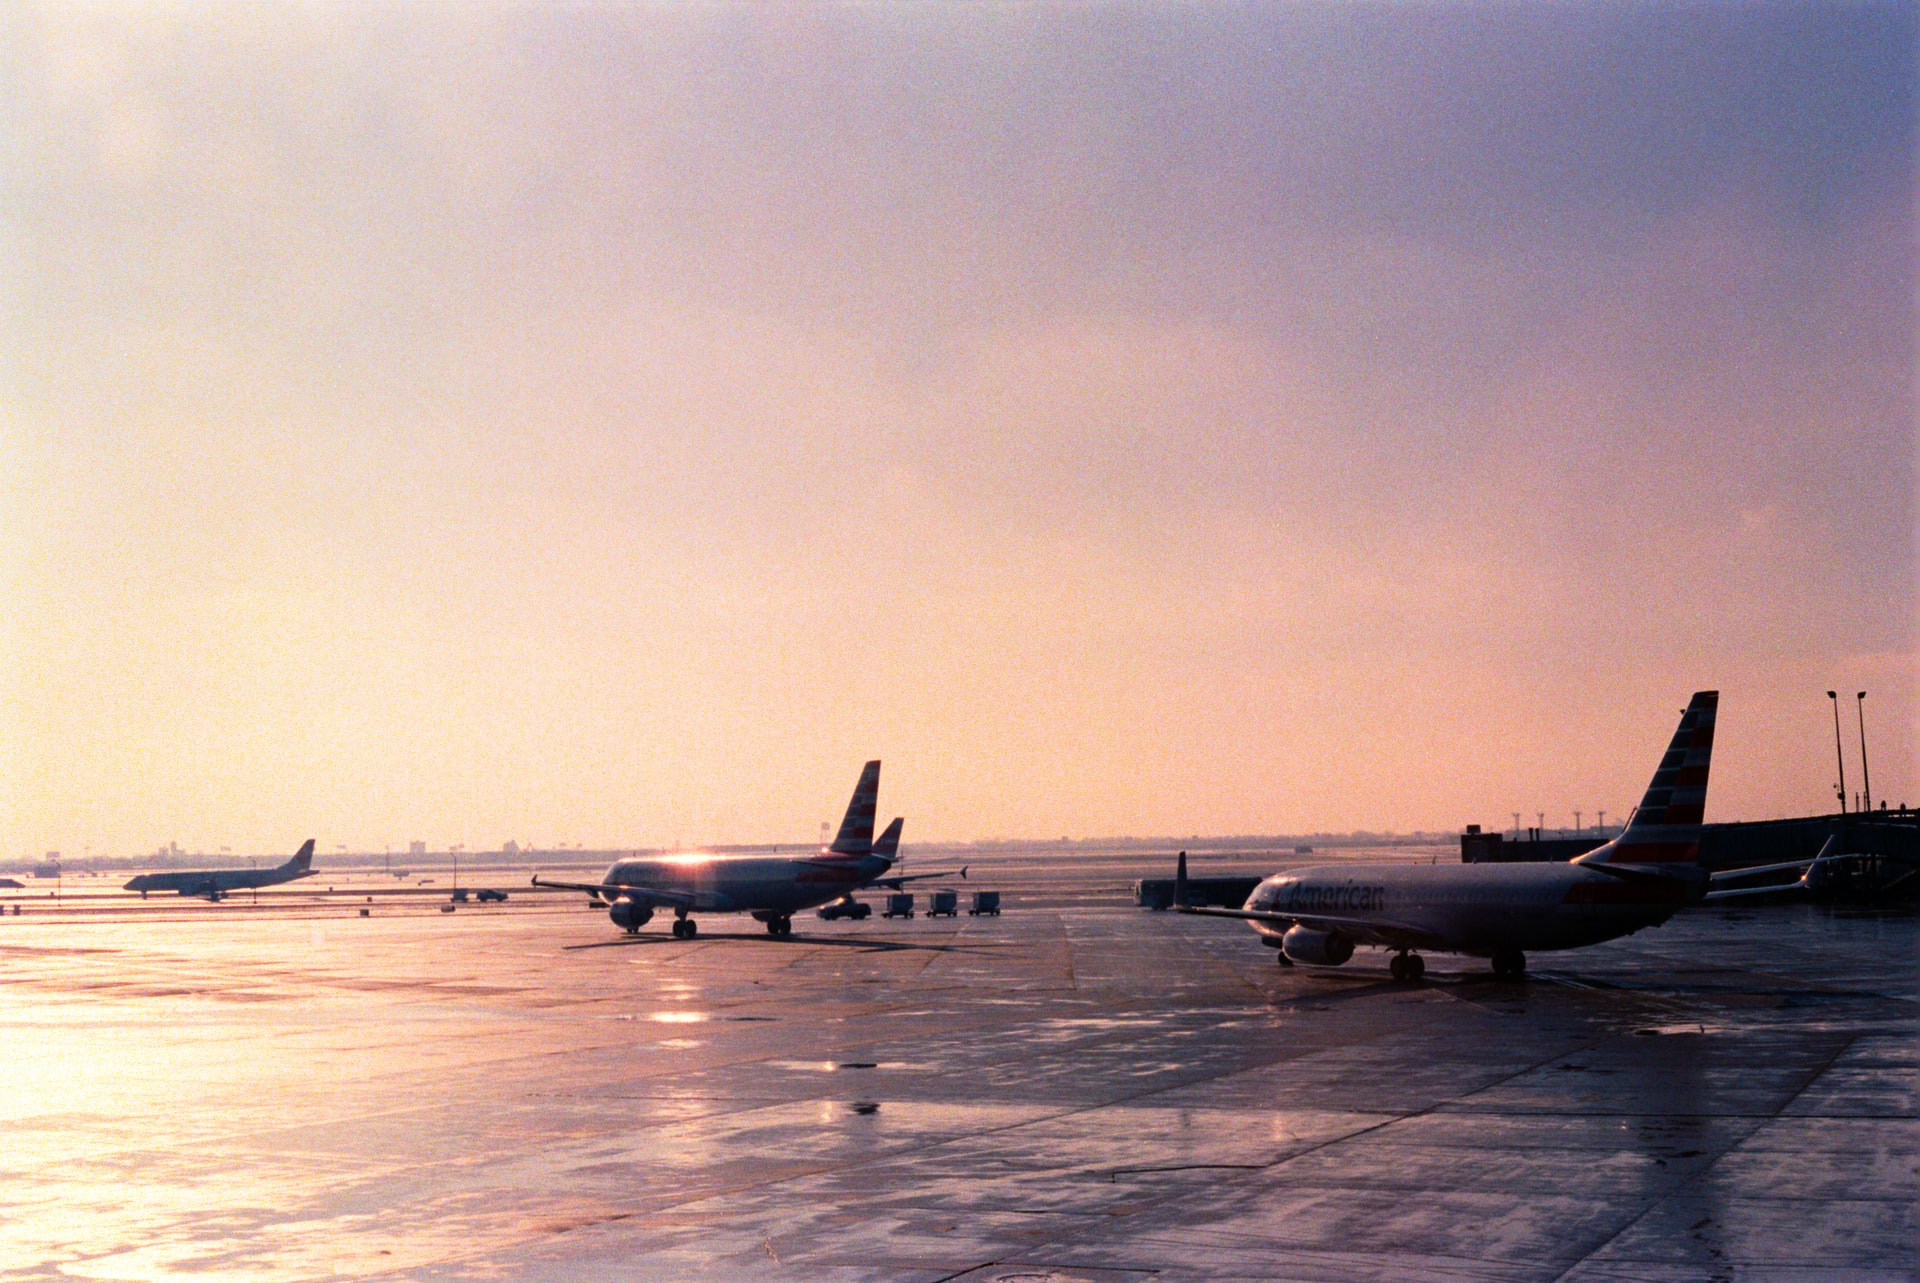 Airplanes parked on runway